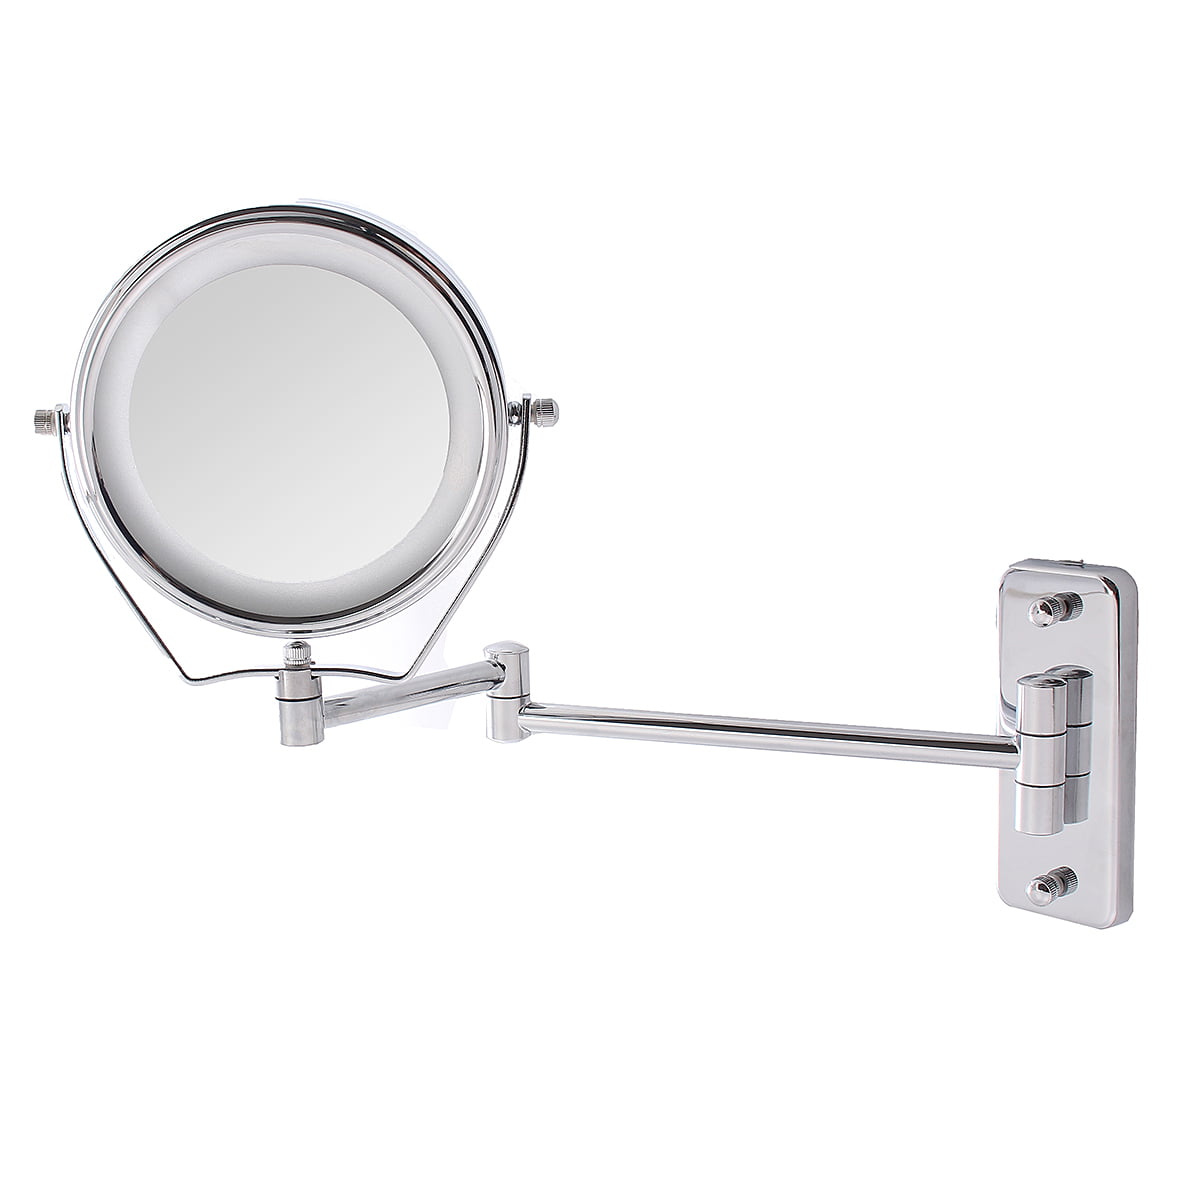 Led Lighted 7x Magnifying Mirrors Wall, Wall Mounted Makeup Mirror With Light 7x